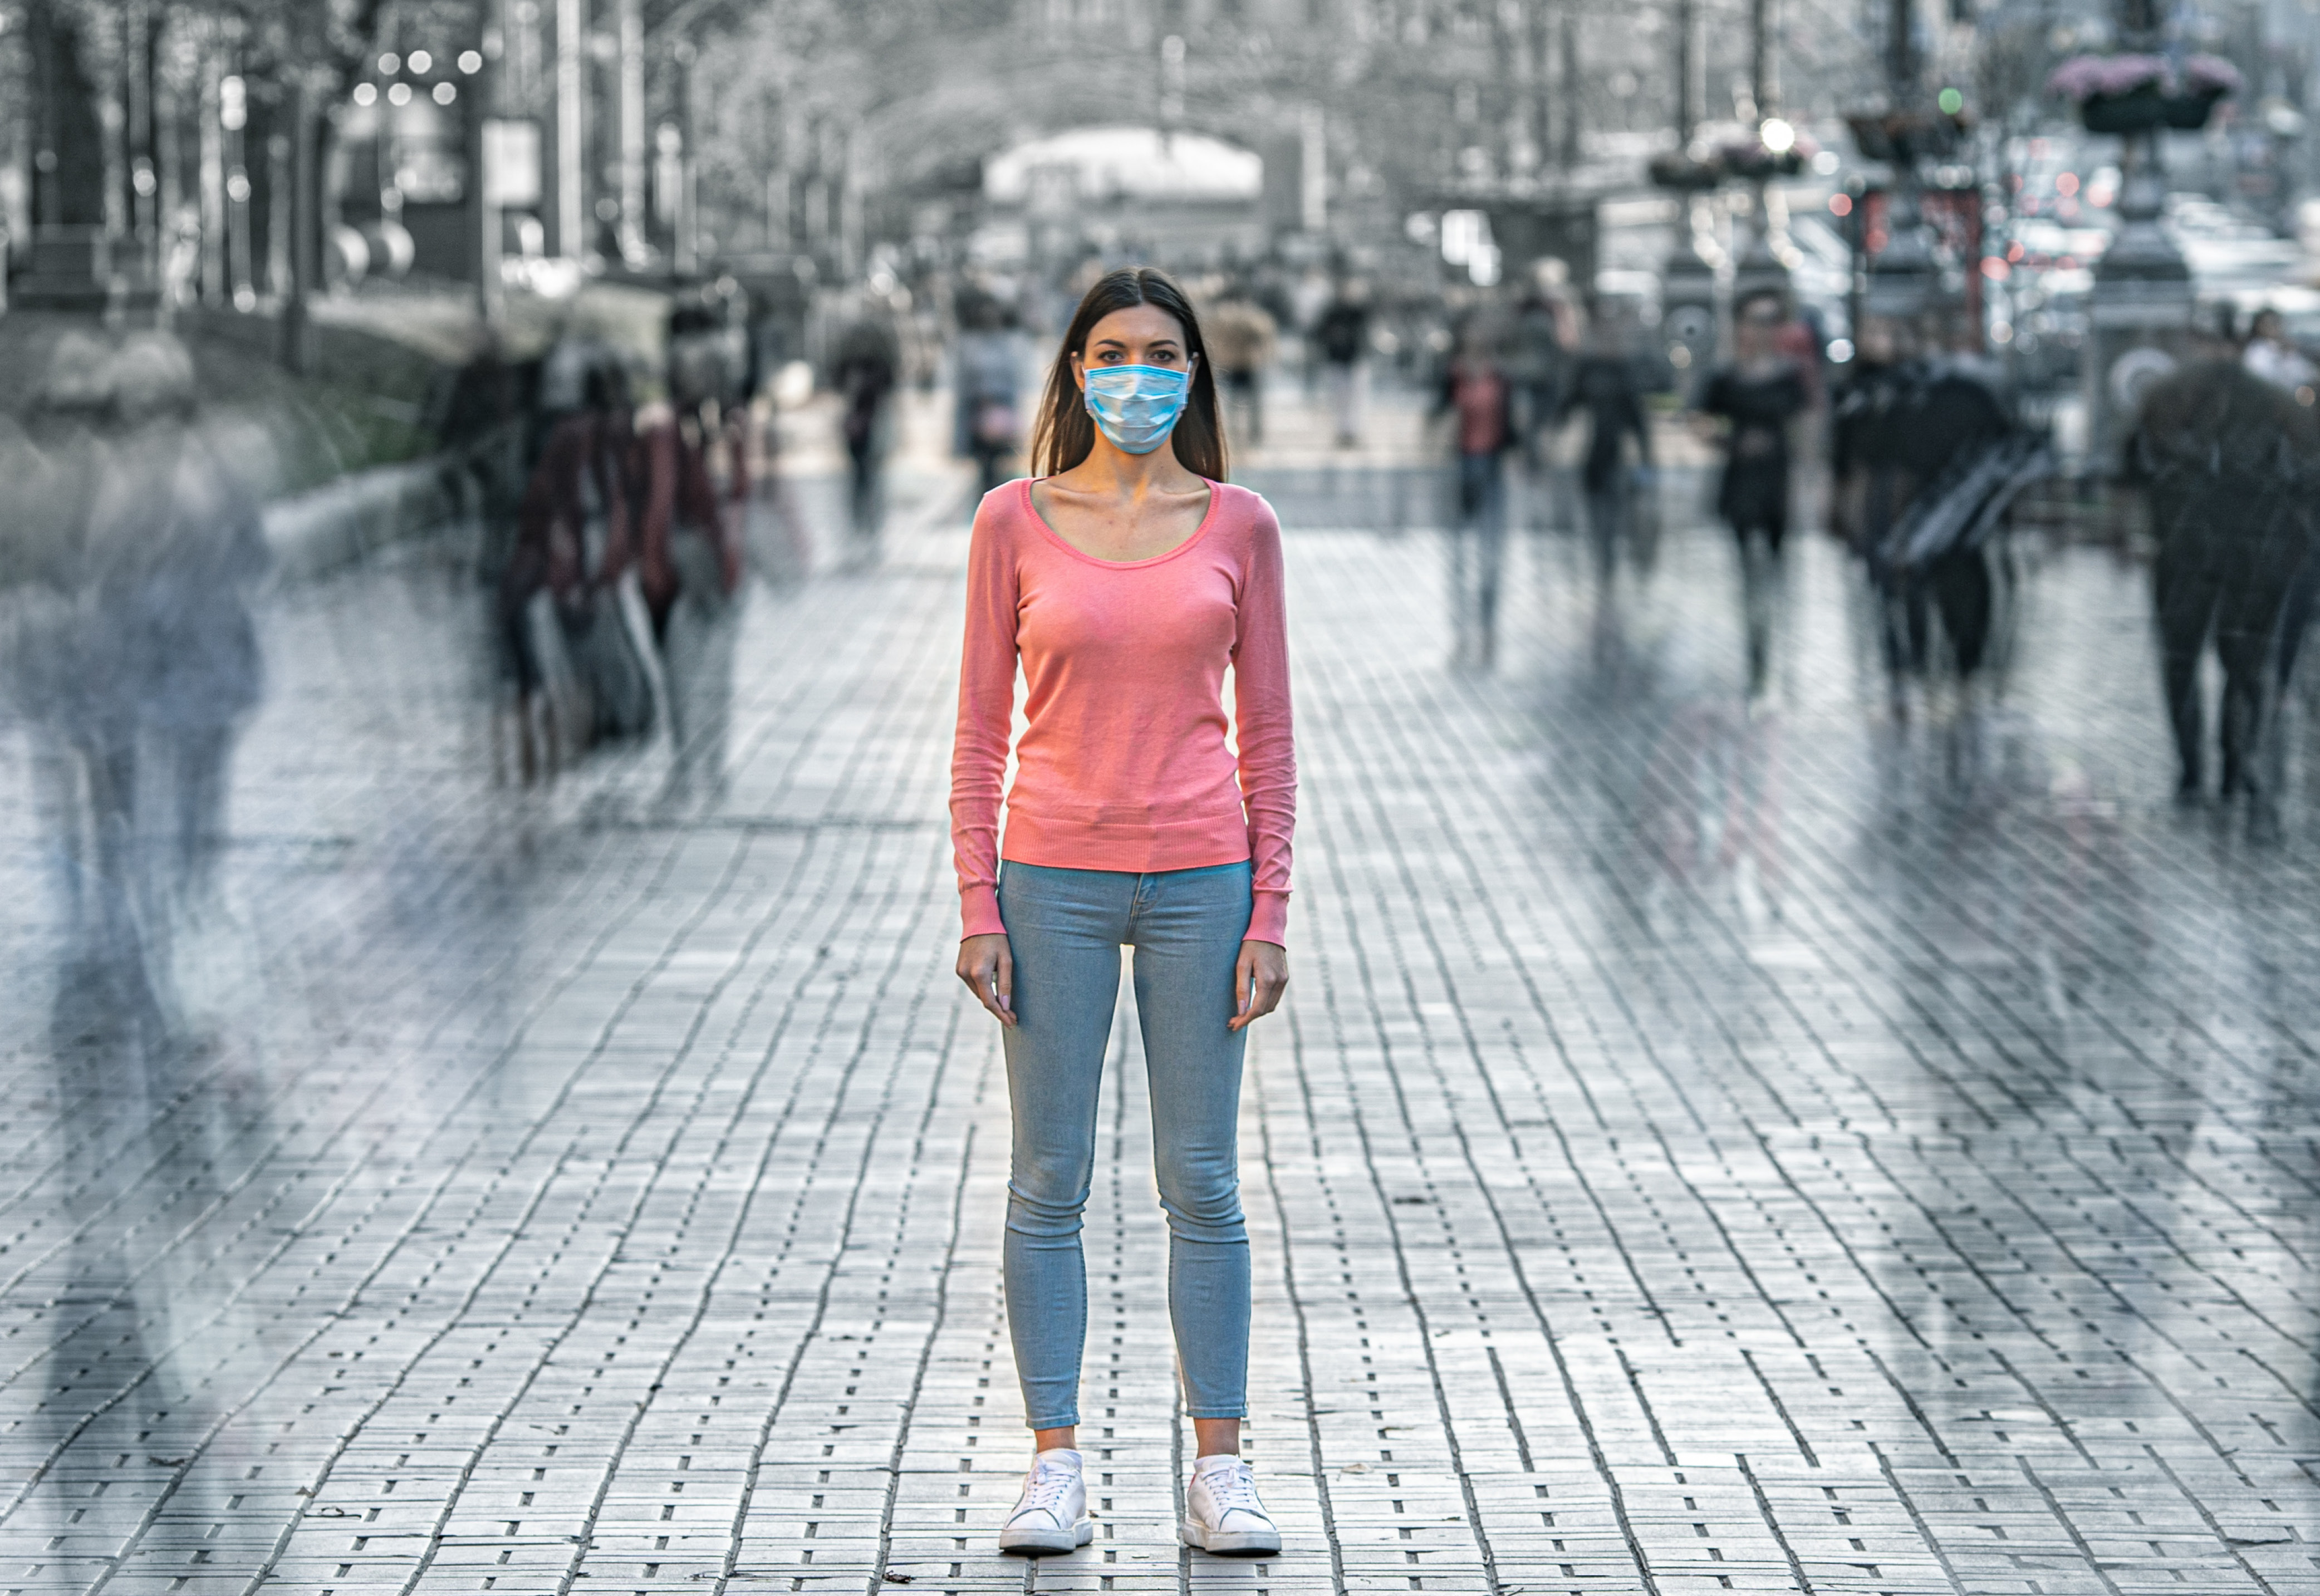 A woman standing on a city street wearing a face mask